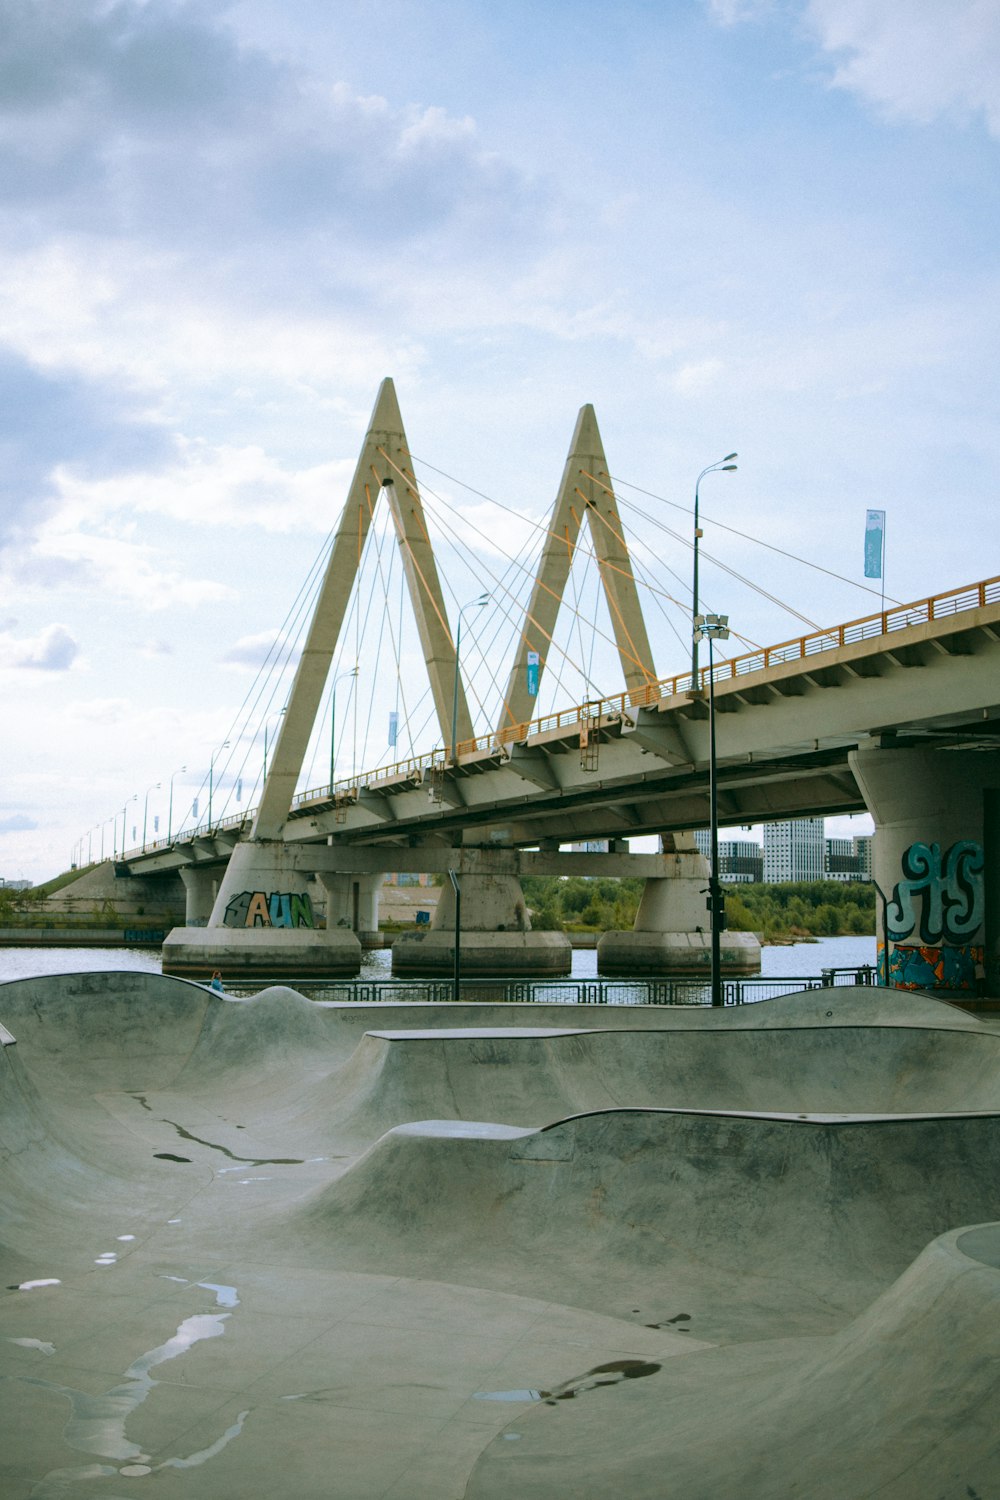 a skateboard park with a bridge in the background